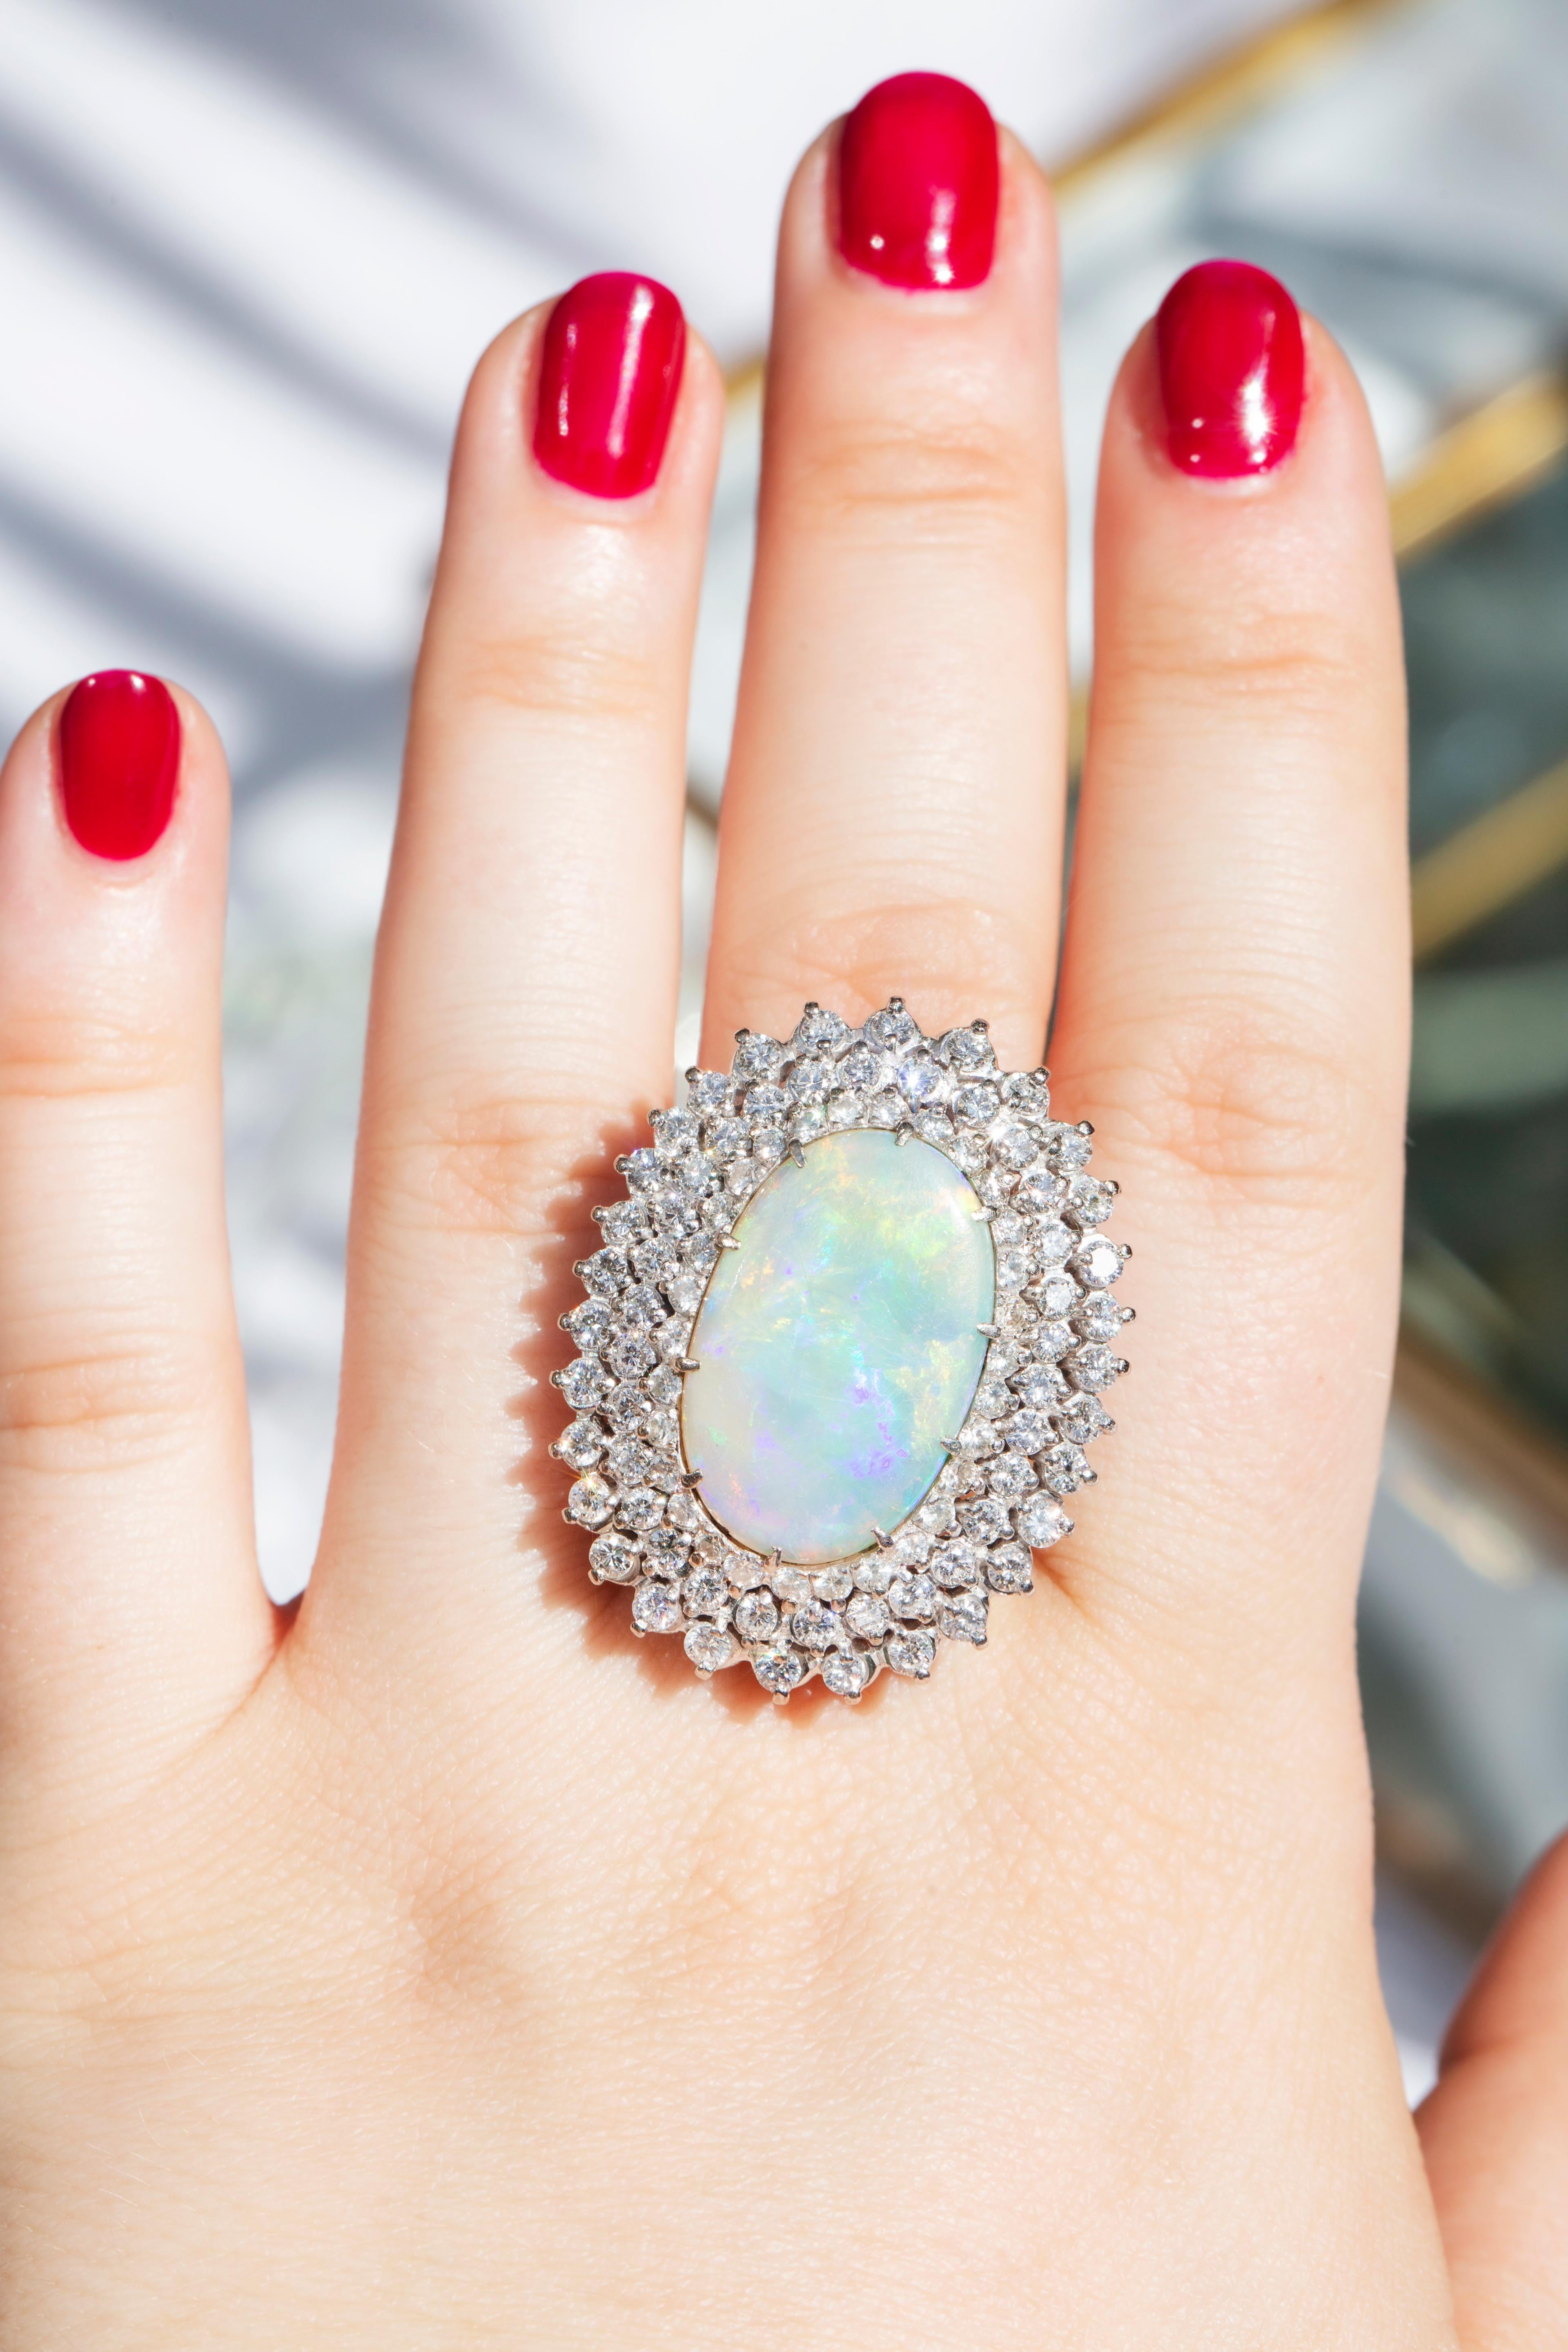 Embodying the romance and beauty of the Australian outback and crafted in 18 carat gold, this stunning vintage opal ring is surrounded by processions of sparkling white diamonds. Flashing blue, red and green, reminders of sunsets on heavenly summer